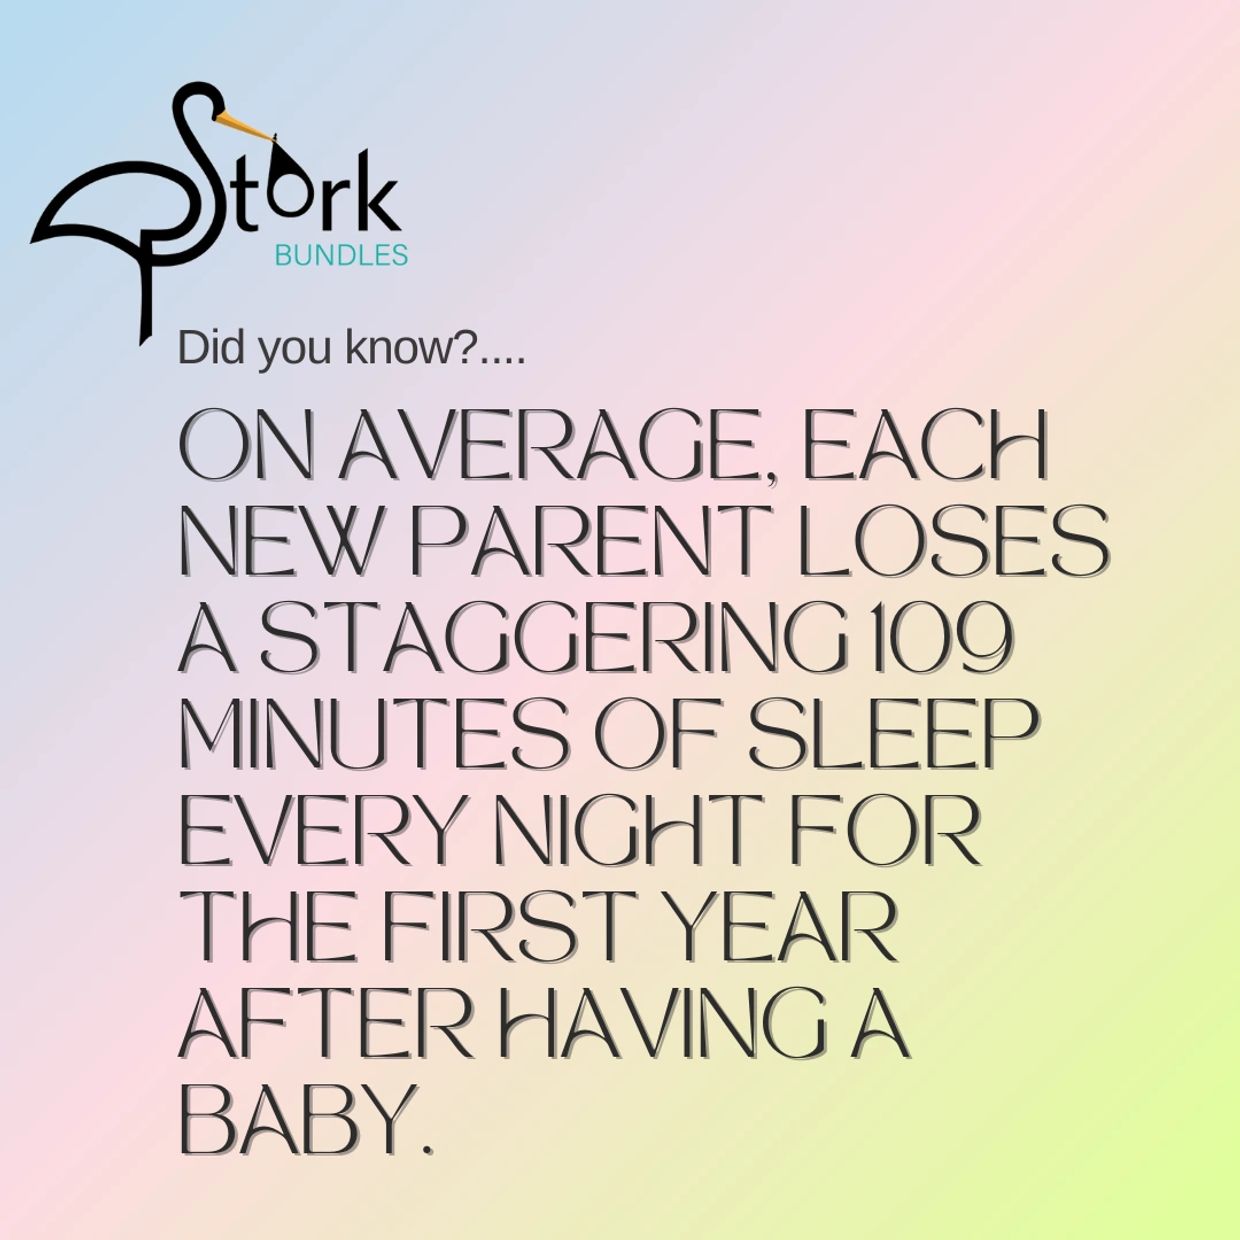 New parent and baby sleep. Sleep with a new baby. Lack of sleep for parents. Stork Bundles.